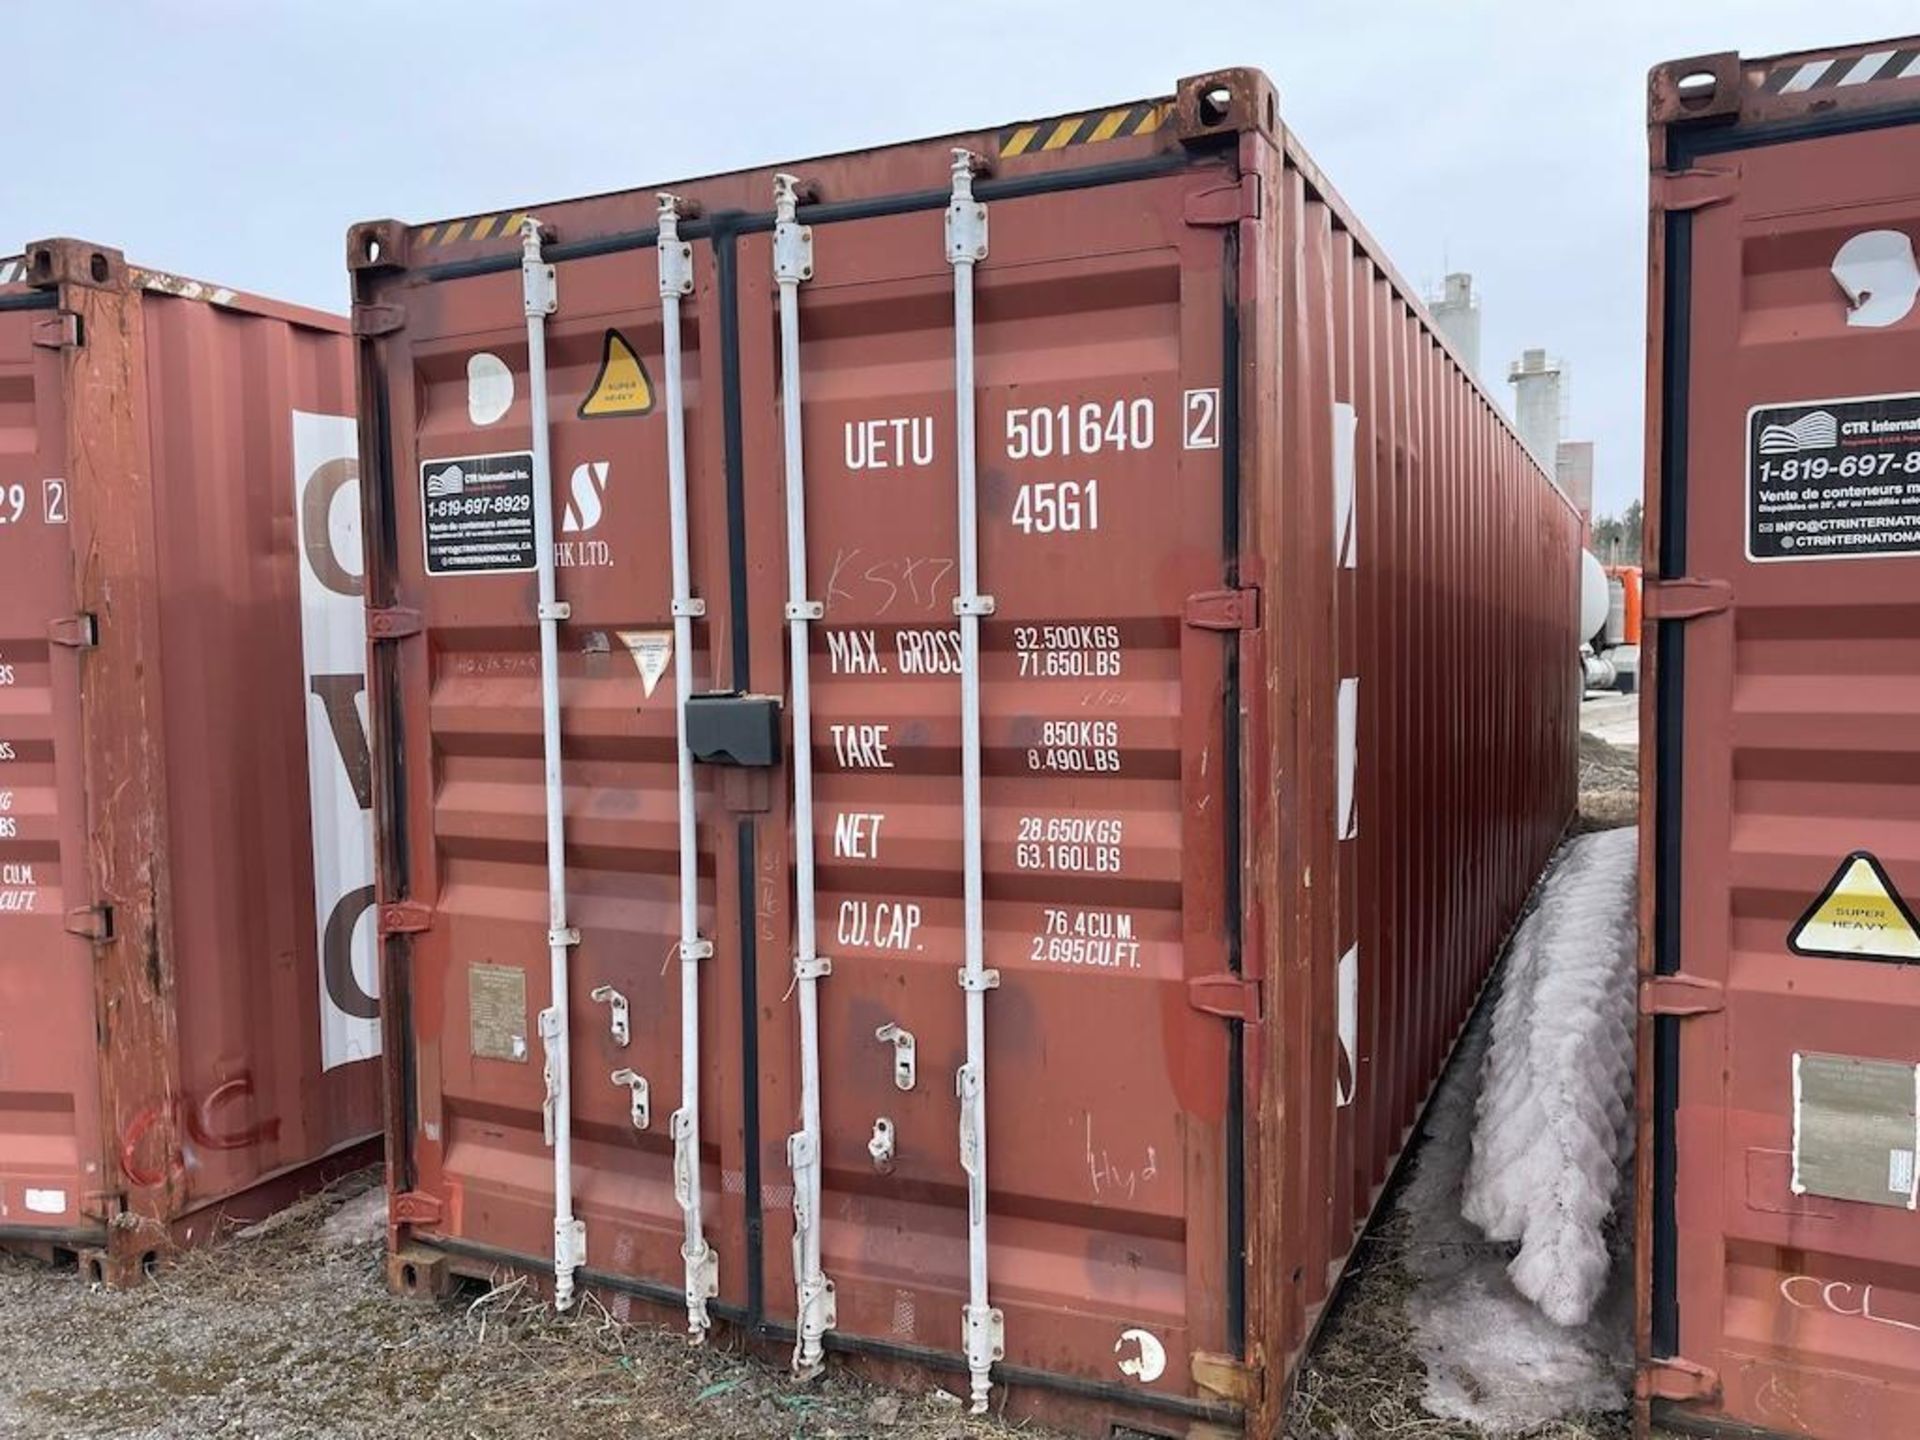 40 FT SEA CONTAINER, EXCLUDING CONTENTS, DELAYED PICK UP UNTIL MAY 13 [12] [TROIS RIVIERES] *PLEASE - Image 2 of 4